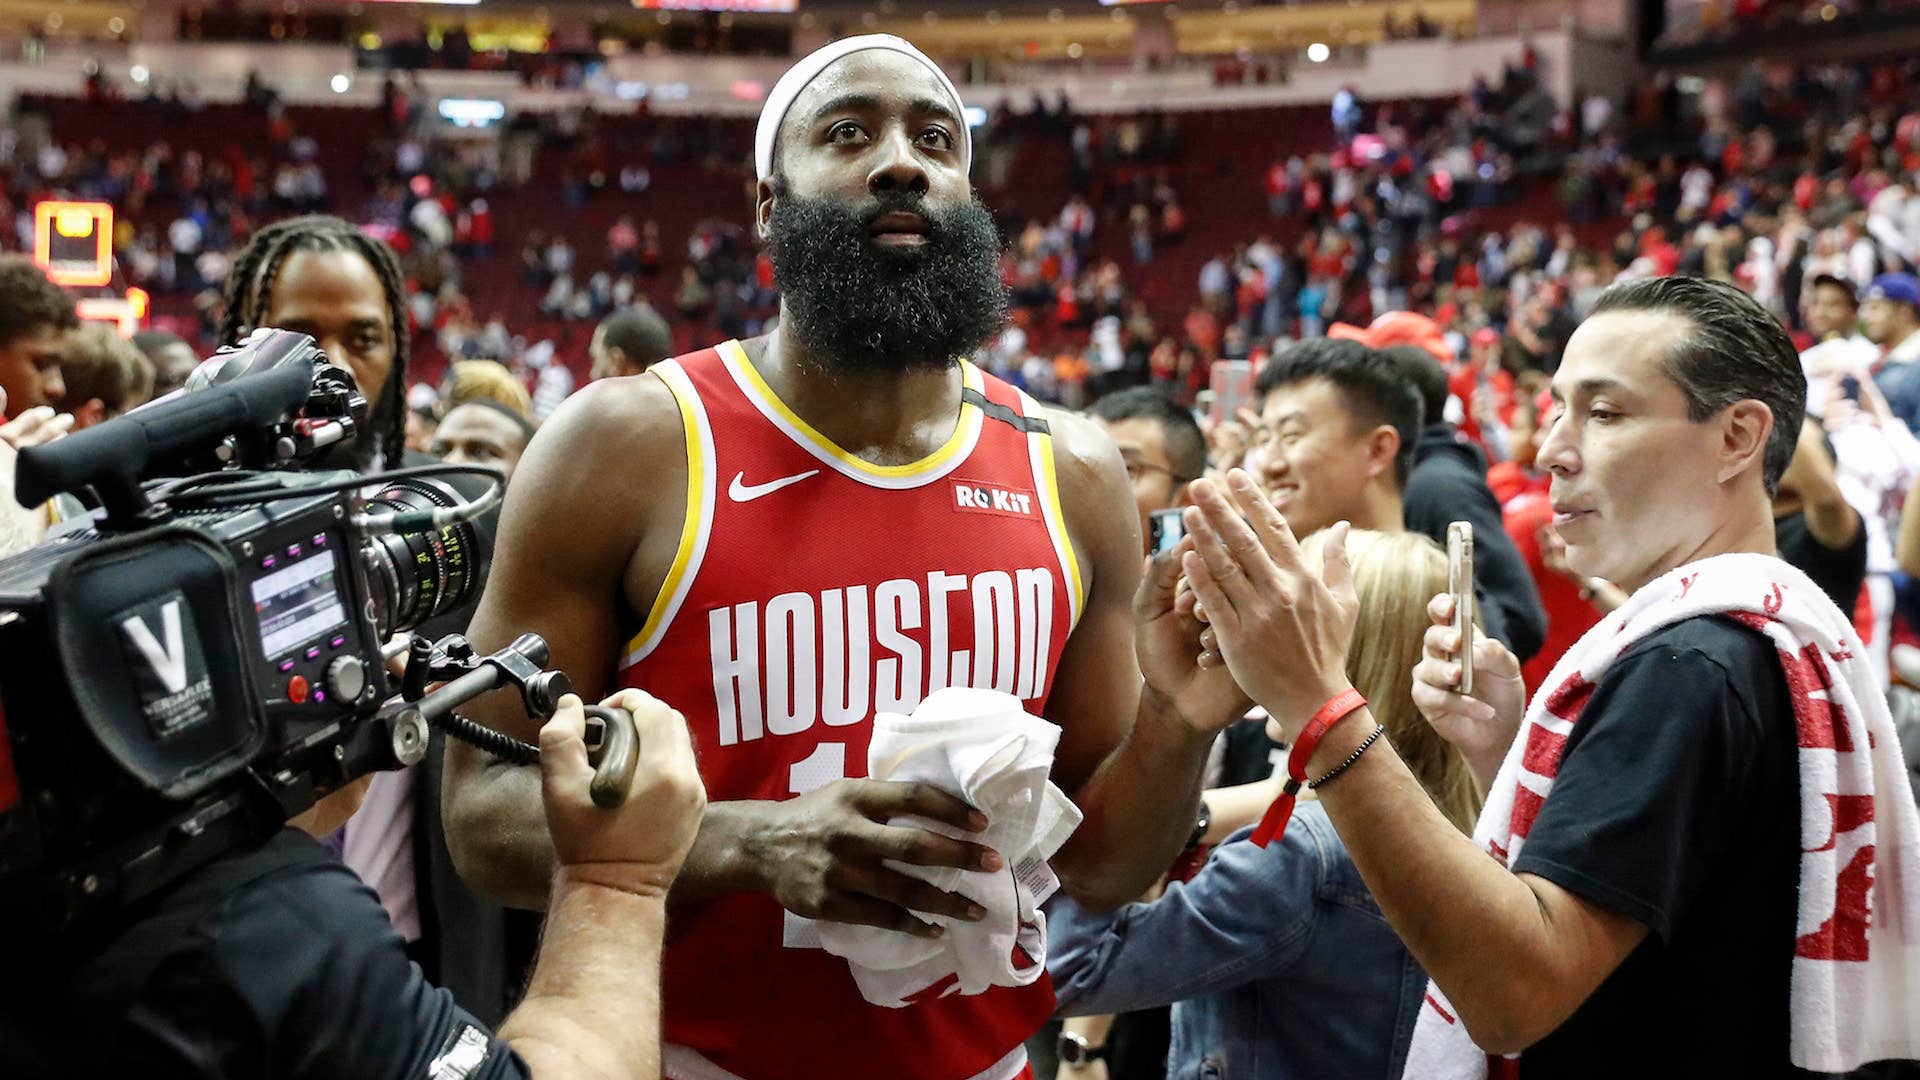 James Harden #13 of the Houston Rockets greets fans on the way to the locker room